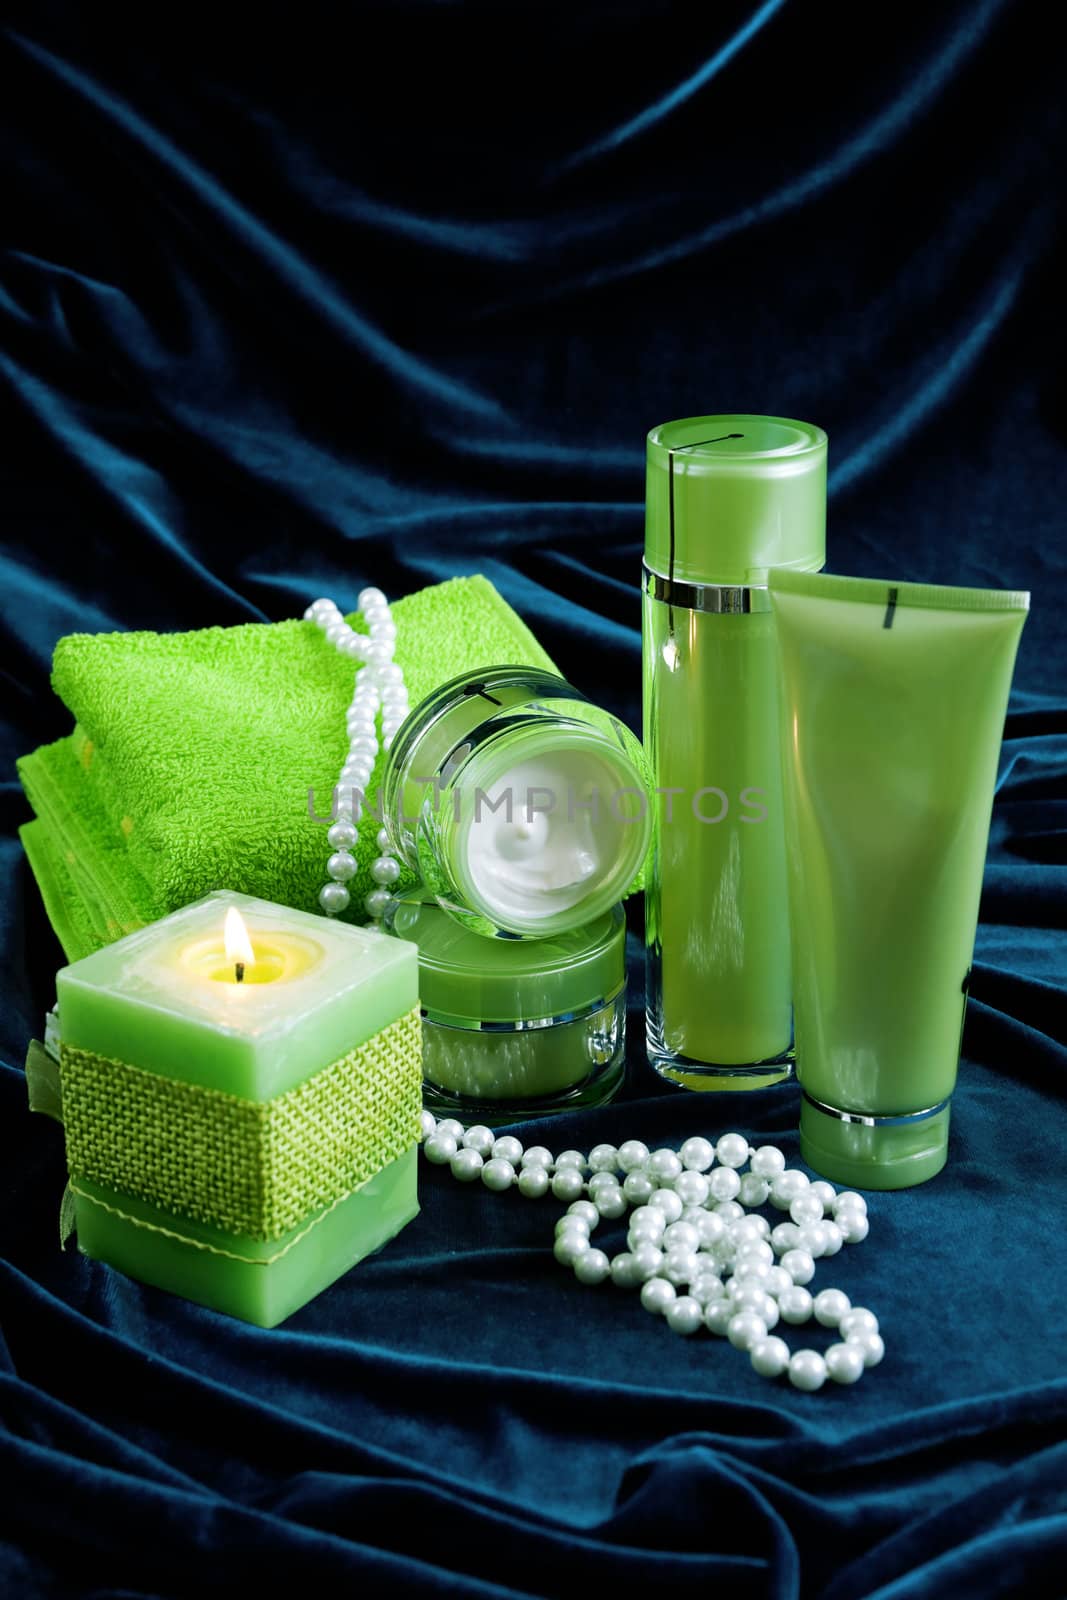 Creams for body care, candles and a green towel on a dark blue glossy velvet